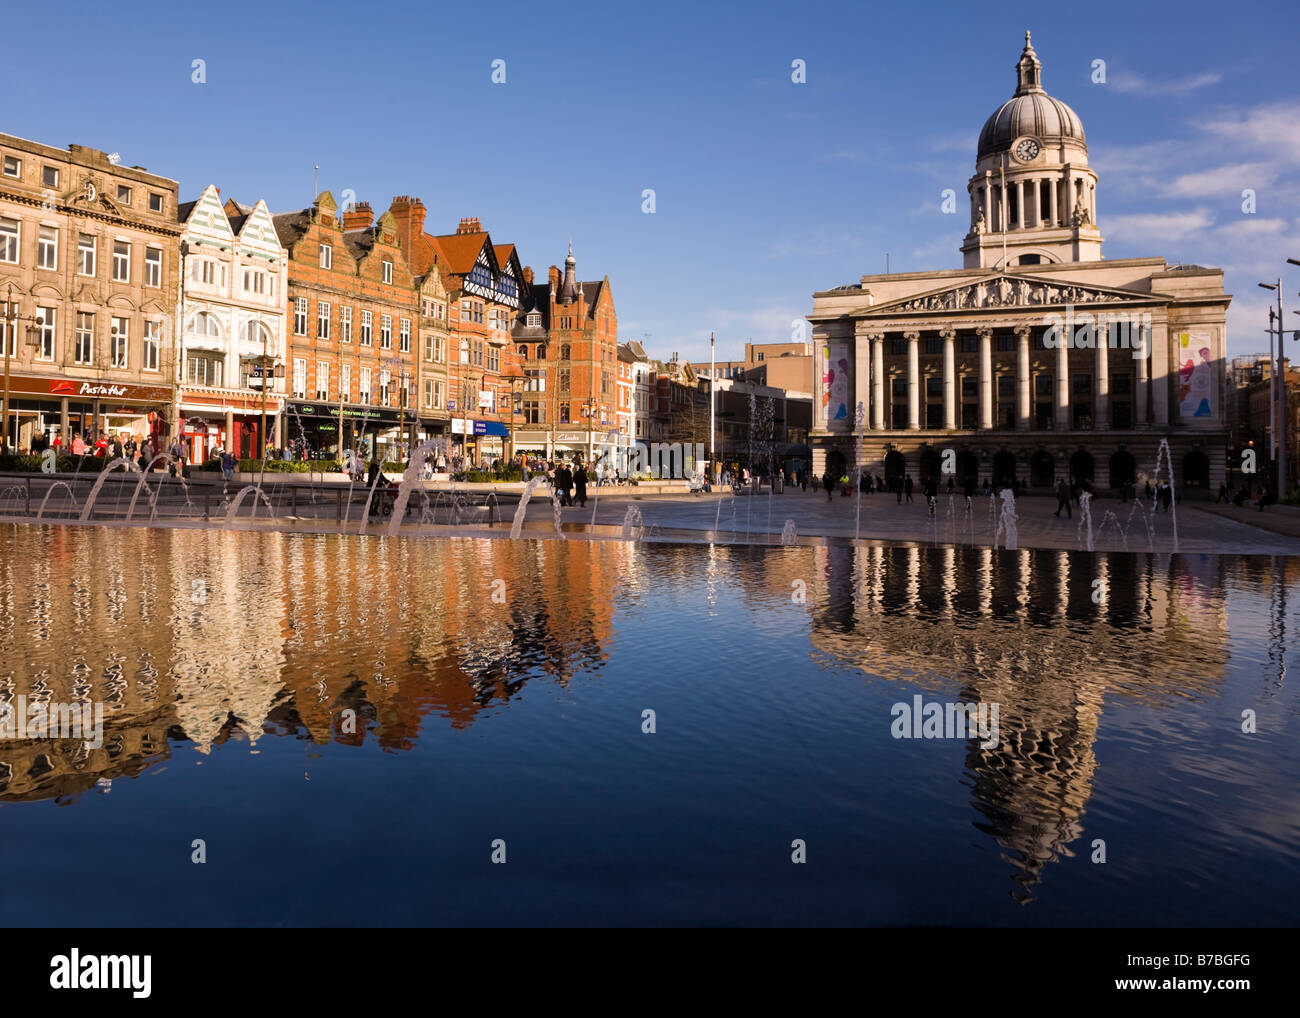 Nottingham City Hall and shops in the Old Market Place and South Parade reflected in the waters of the fountain Stock Photo